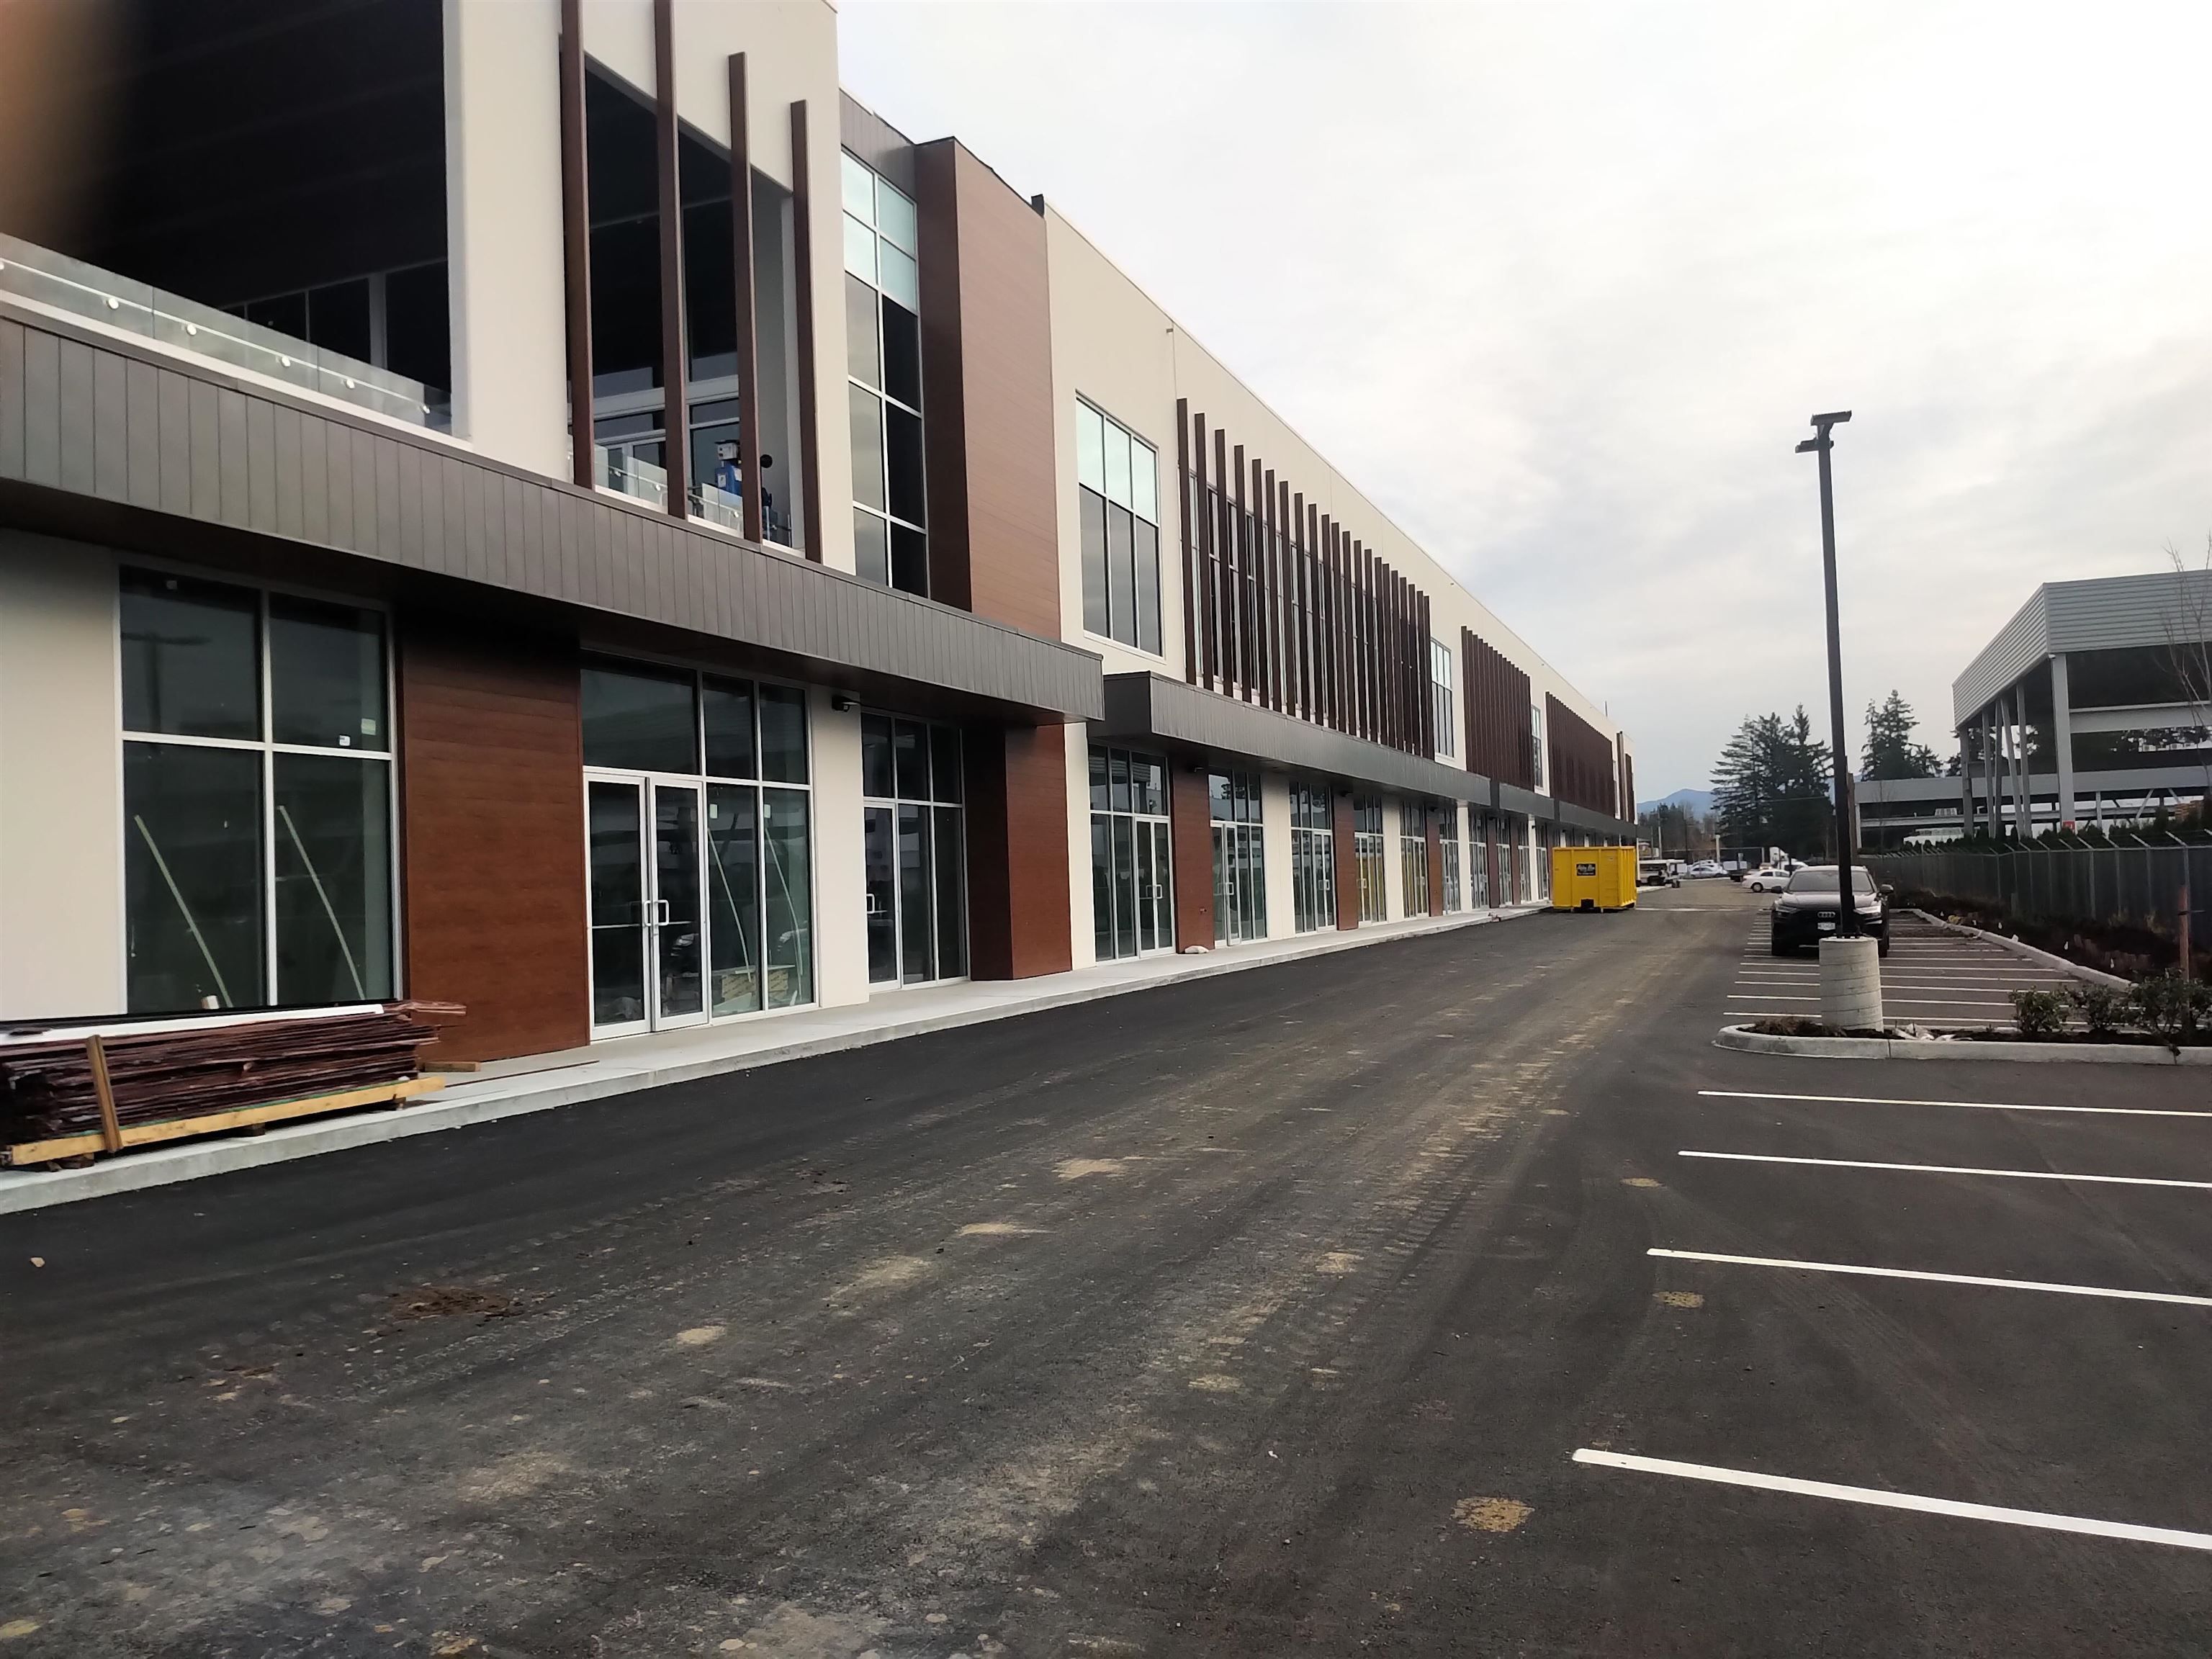 Main Photo: 132 1779 CLEARBROOK Road in Abbotsford: Poplar Office for lease : MLS®# C8044281